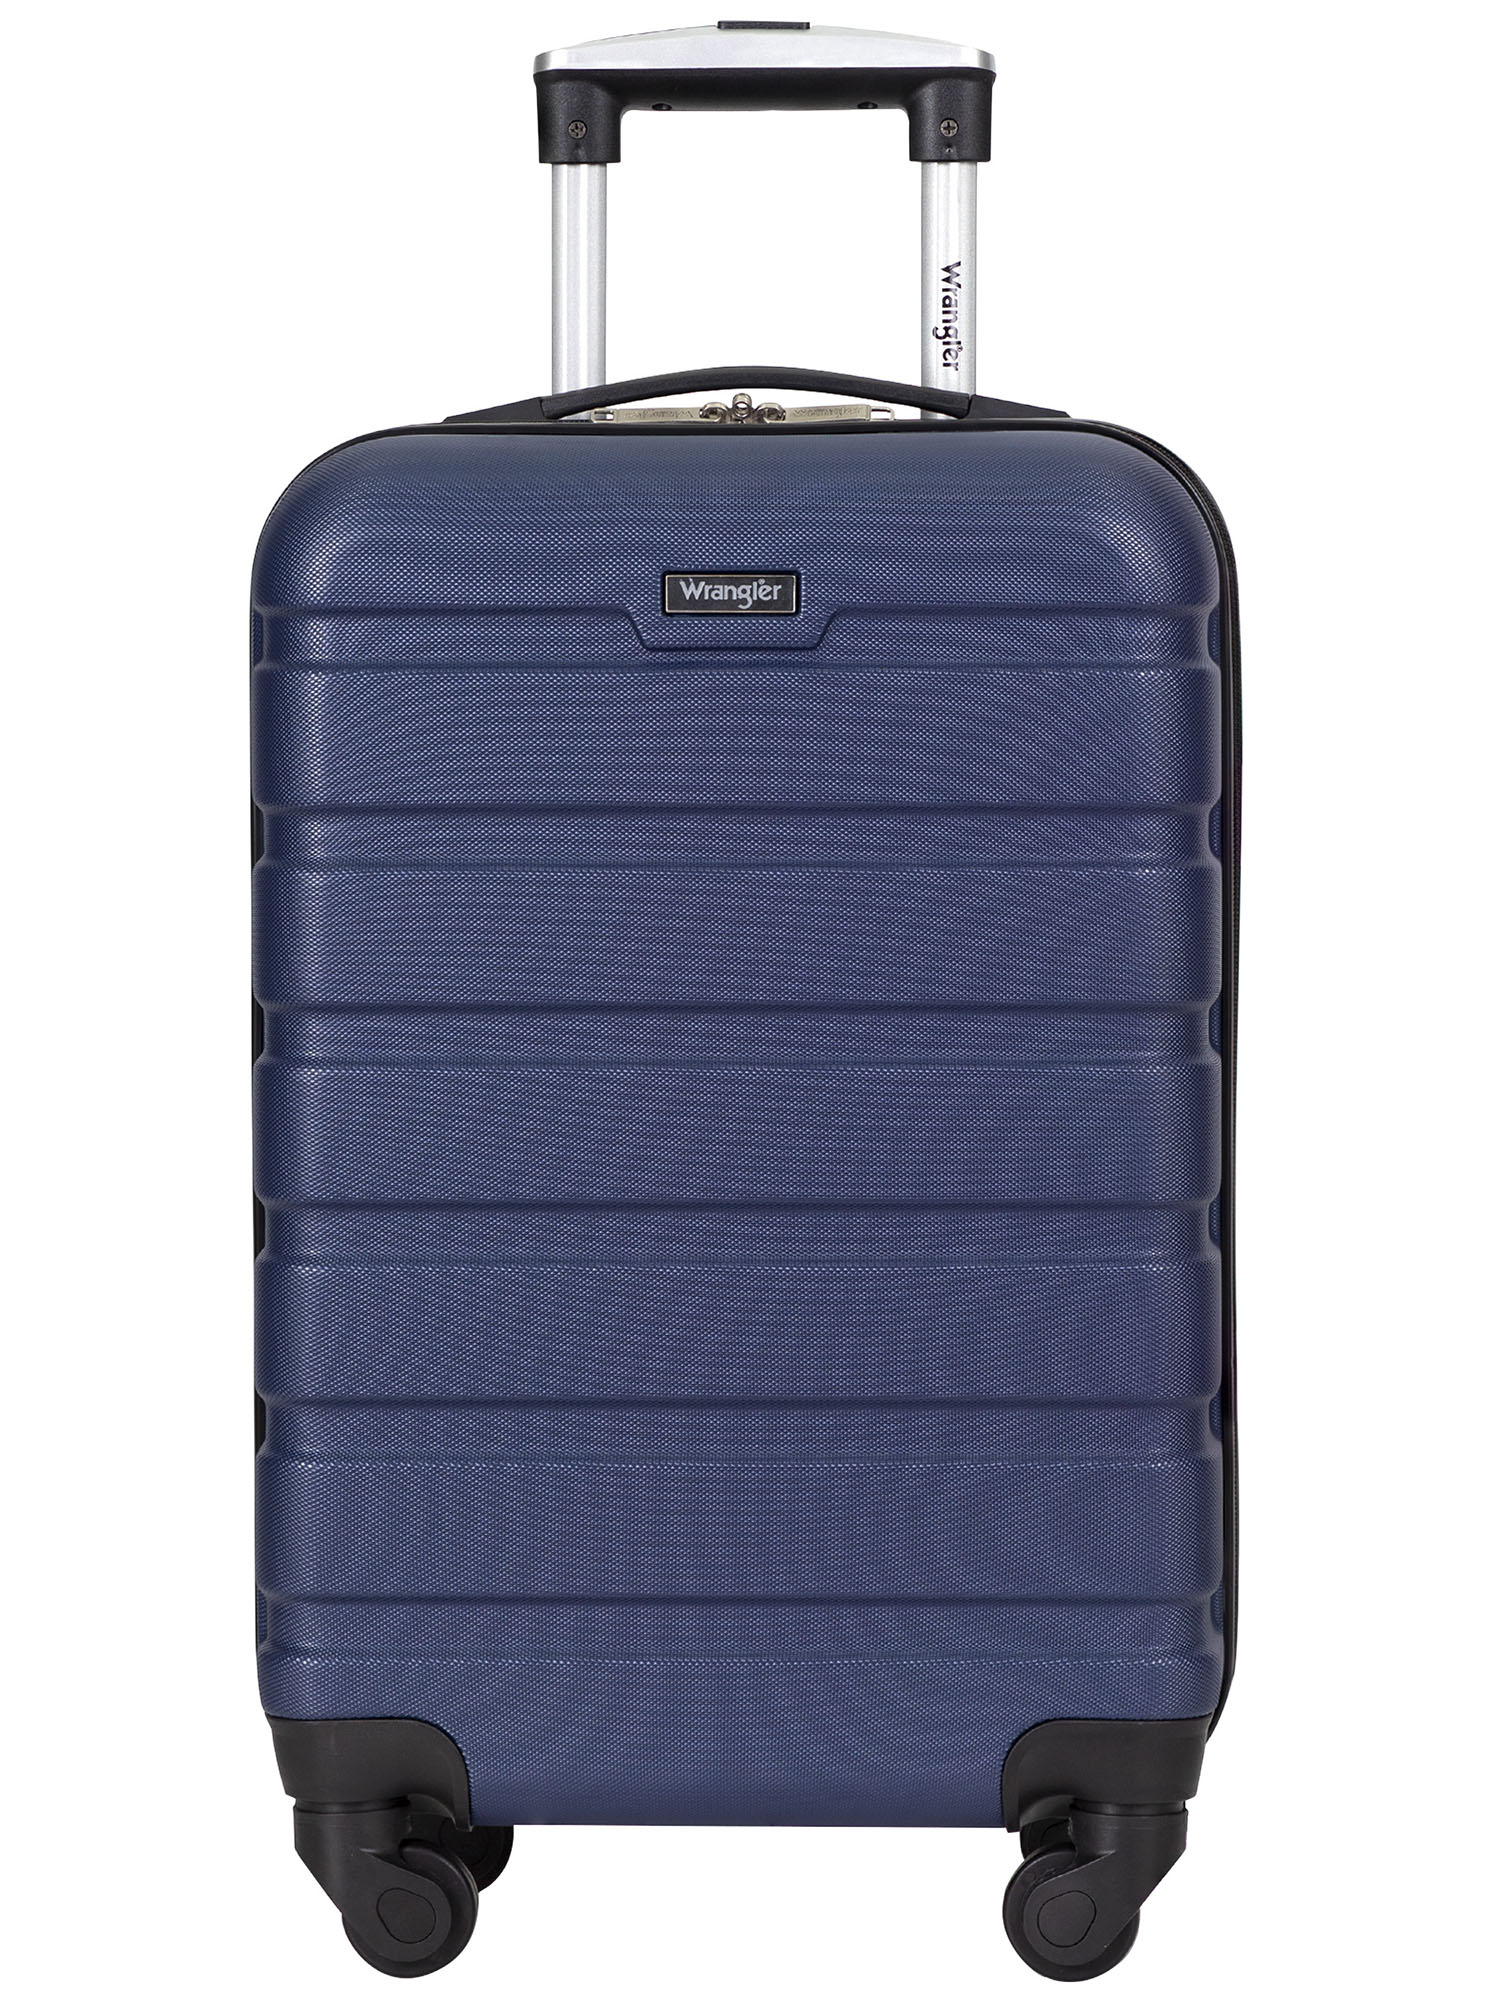 Wrangler 20” Carry-On Rolling Hard side Spinner Luggage - Navy - image 2 of 7